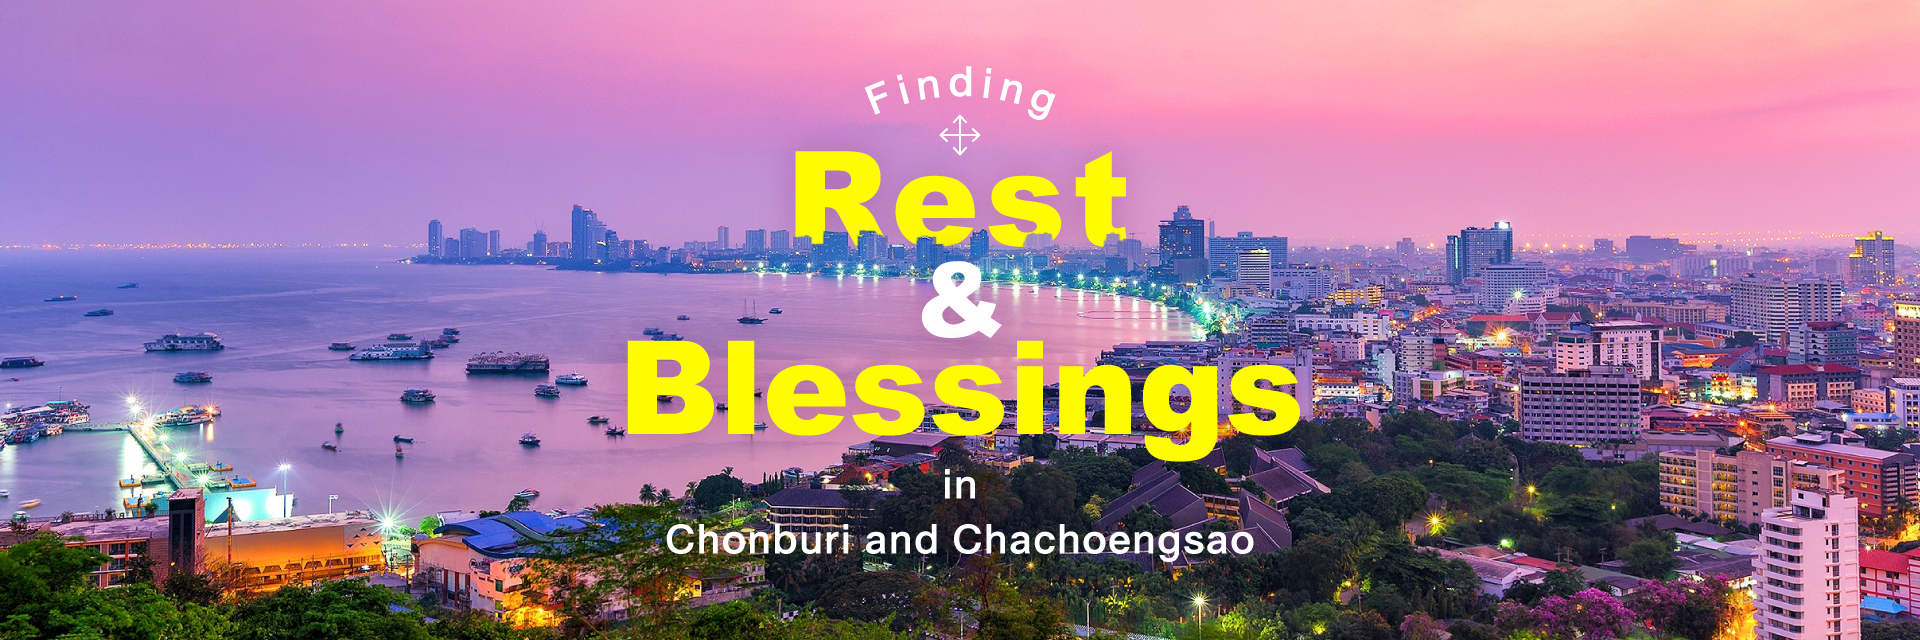 Finding Rest and Blessings in Chonburi and Chachoengsao